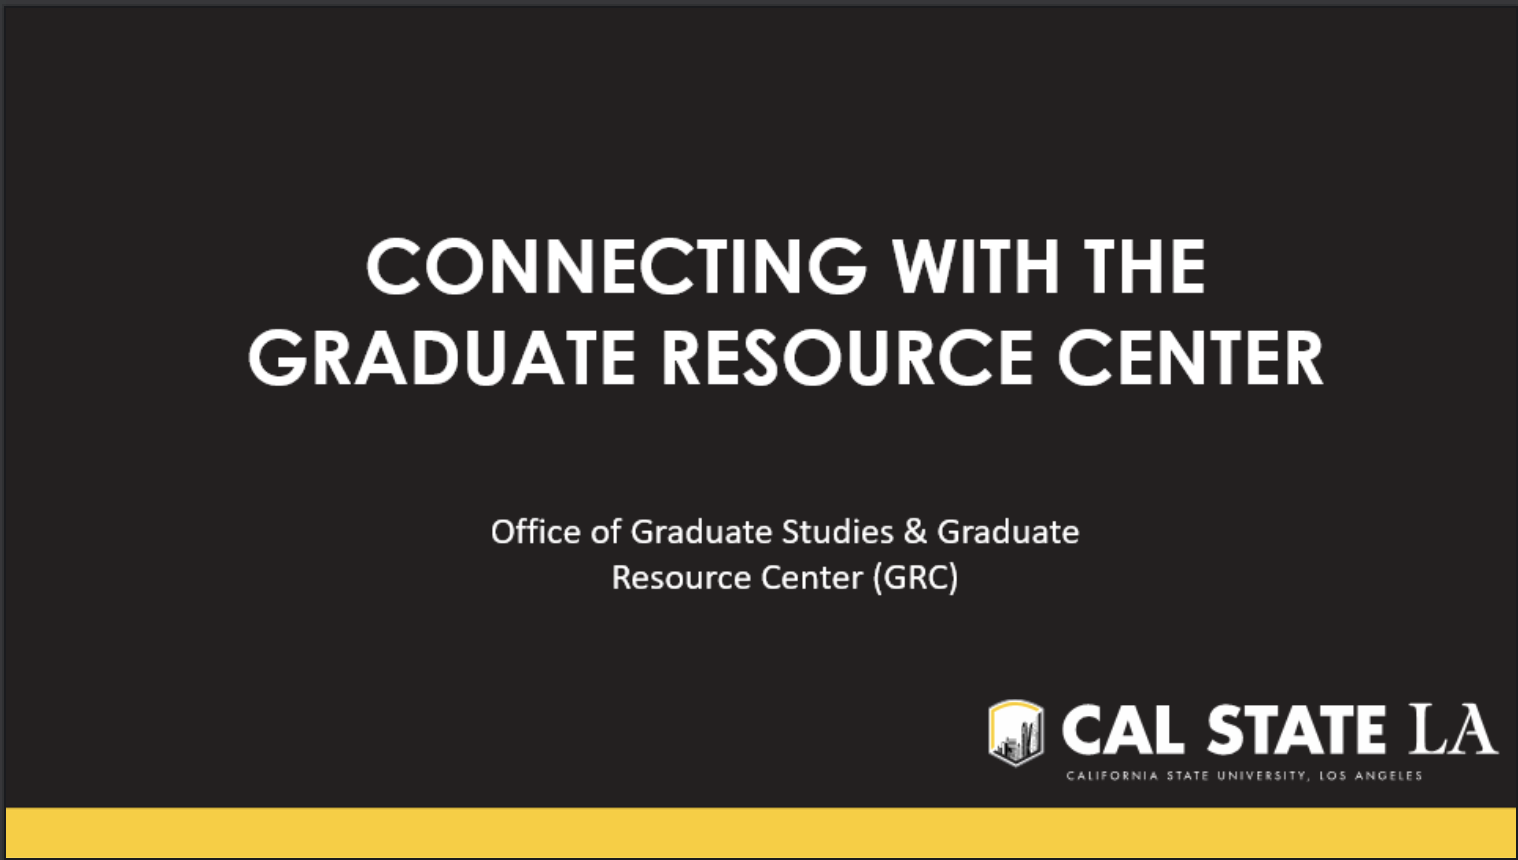 The opening slide from the presentation for Connecting WIth The Graduate Resource Center.